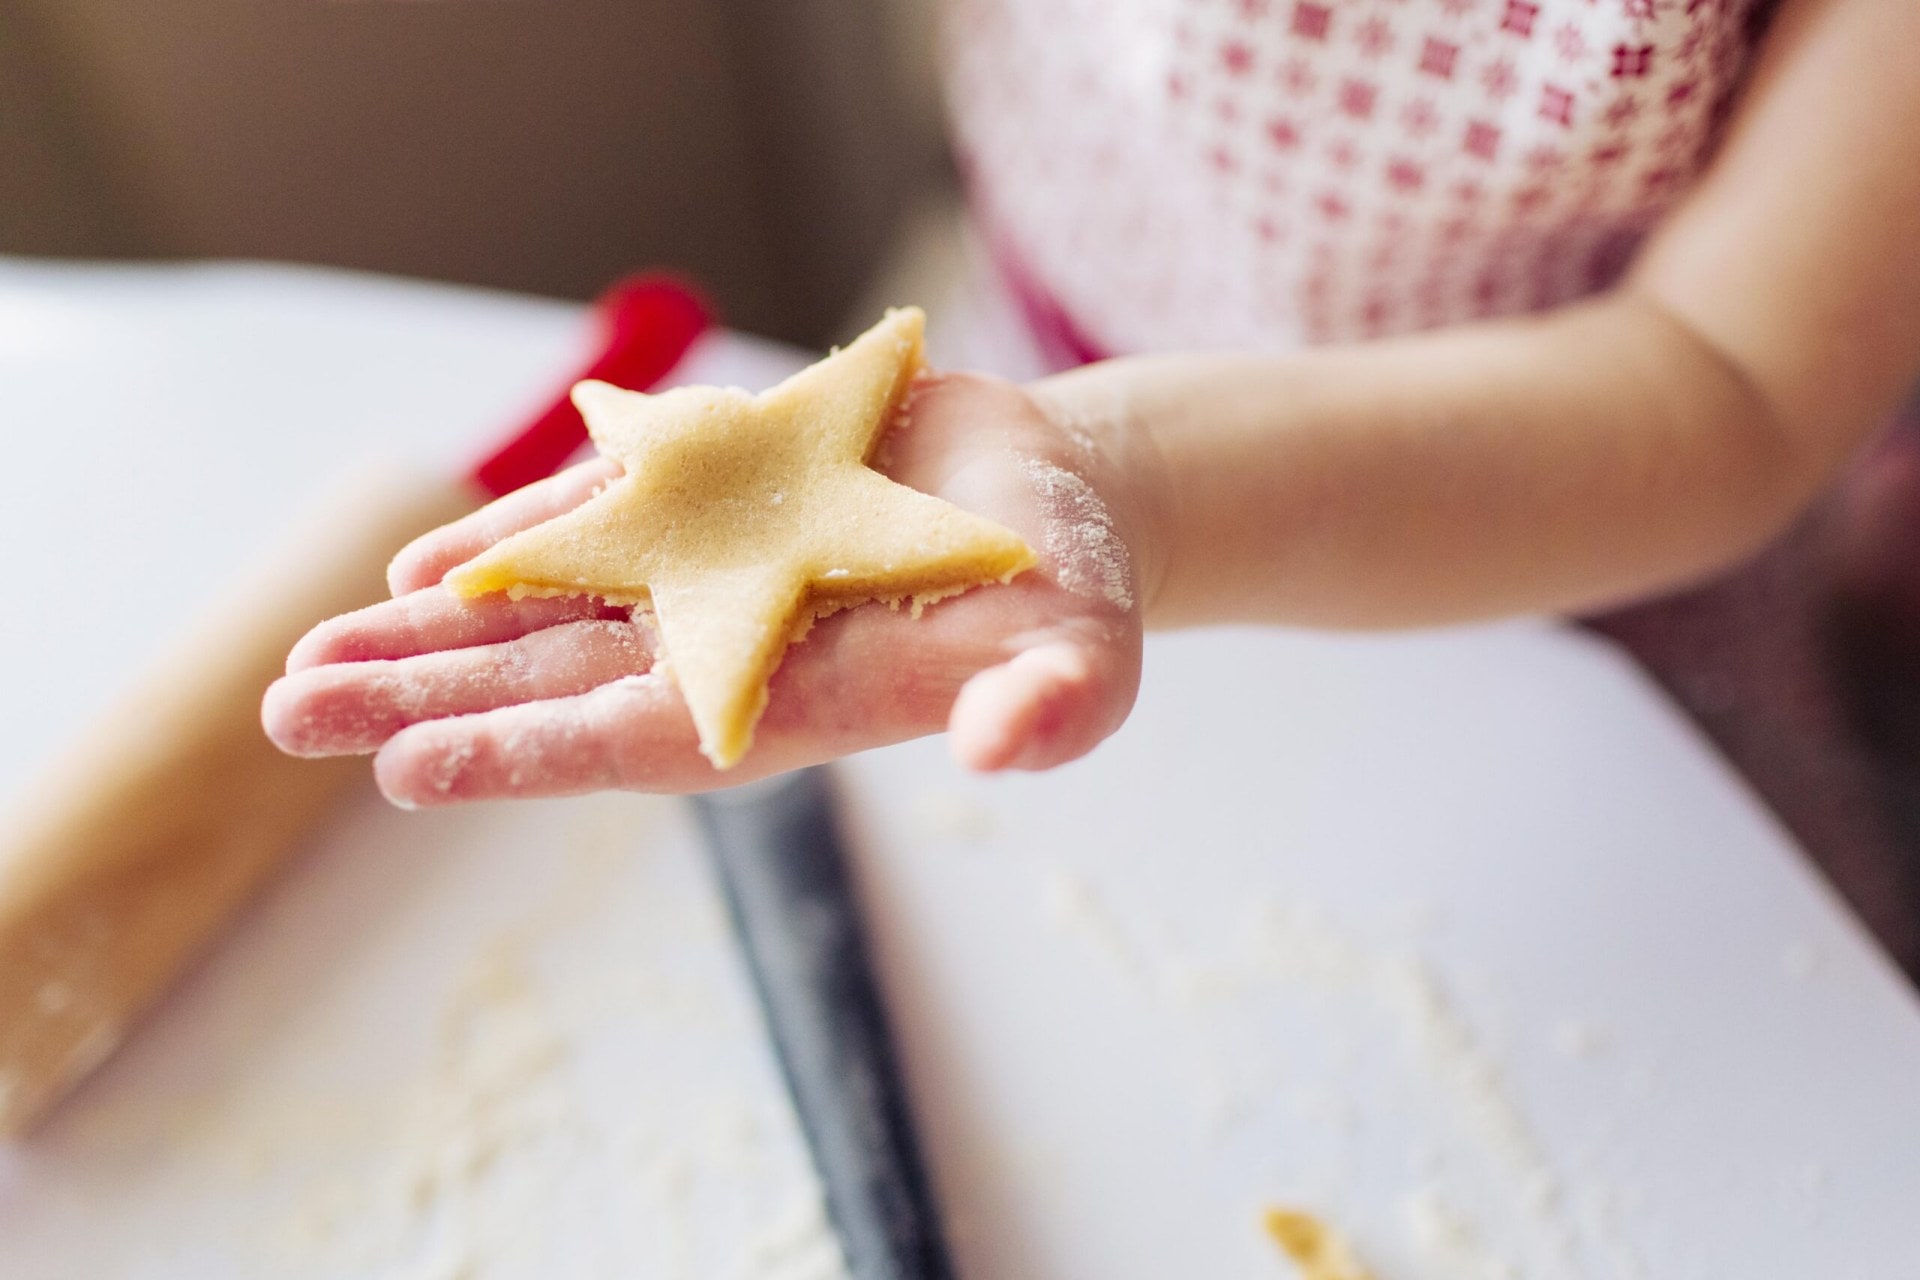 A child's hand holding a dough star biscuit in hand